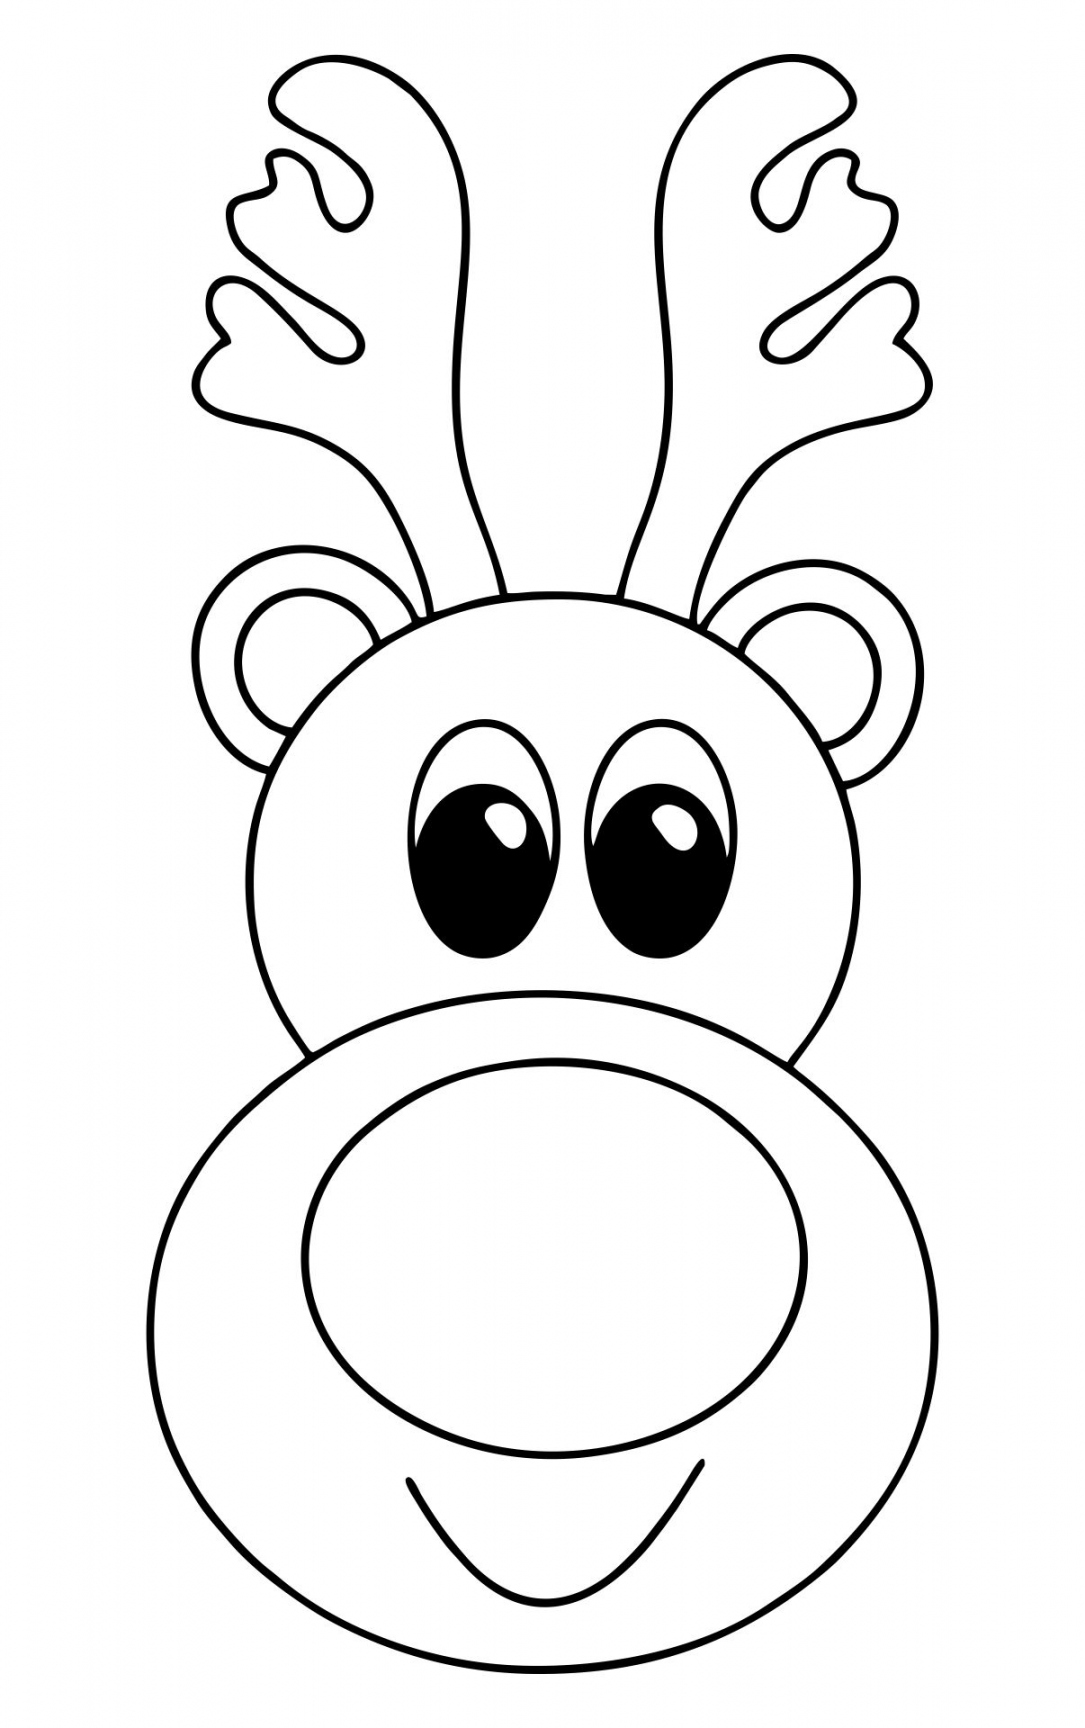 Pin on Crafts - FREE Printables - Cut Out Reindeer Template Printable